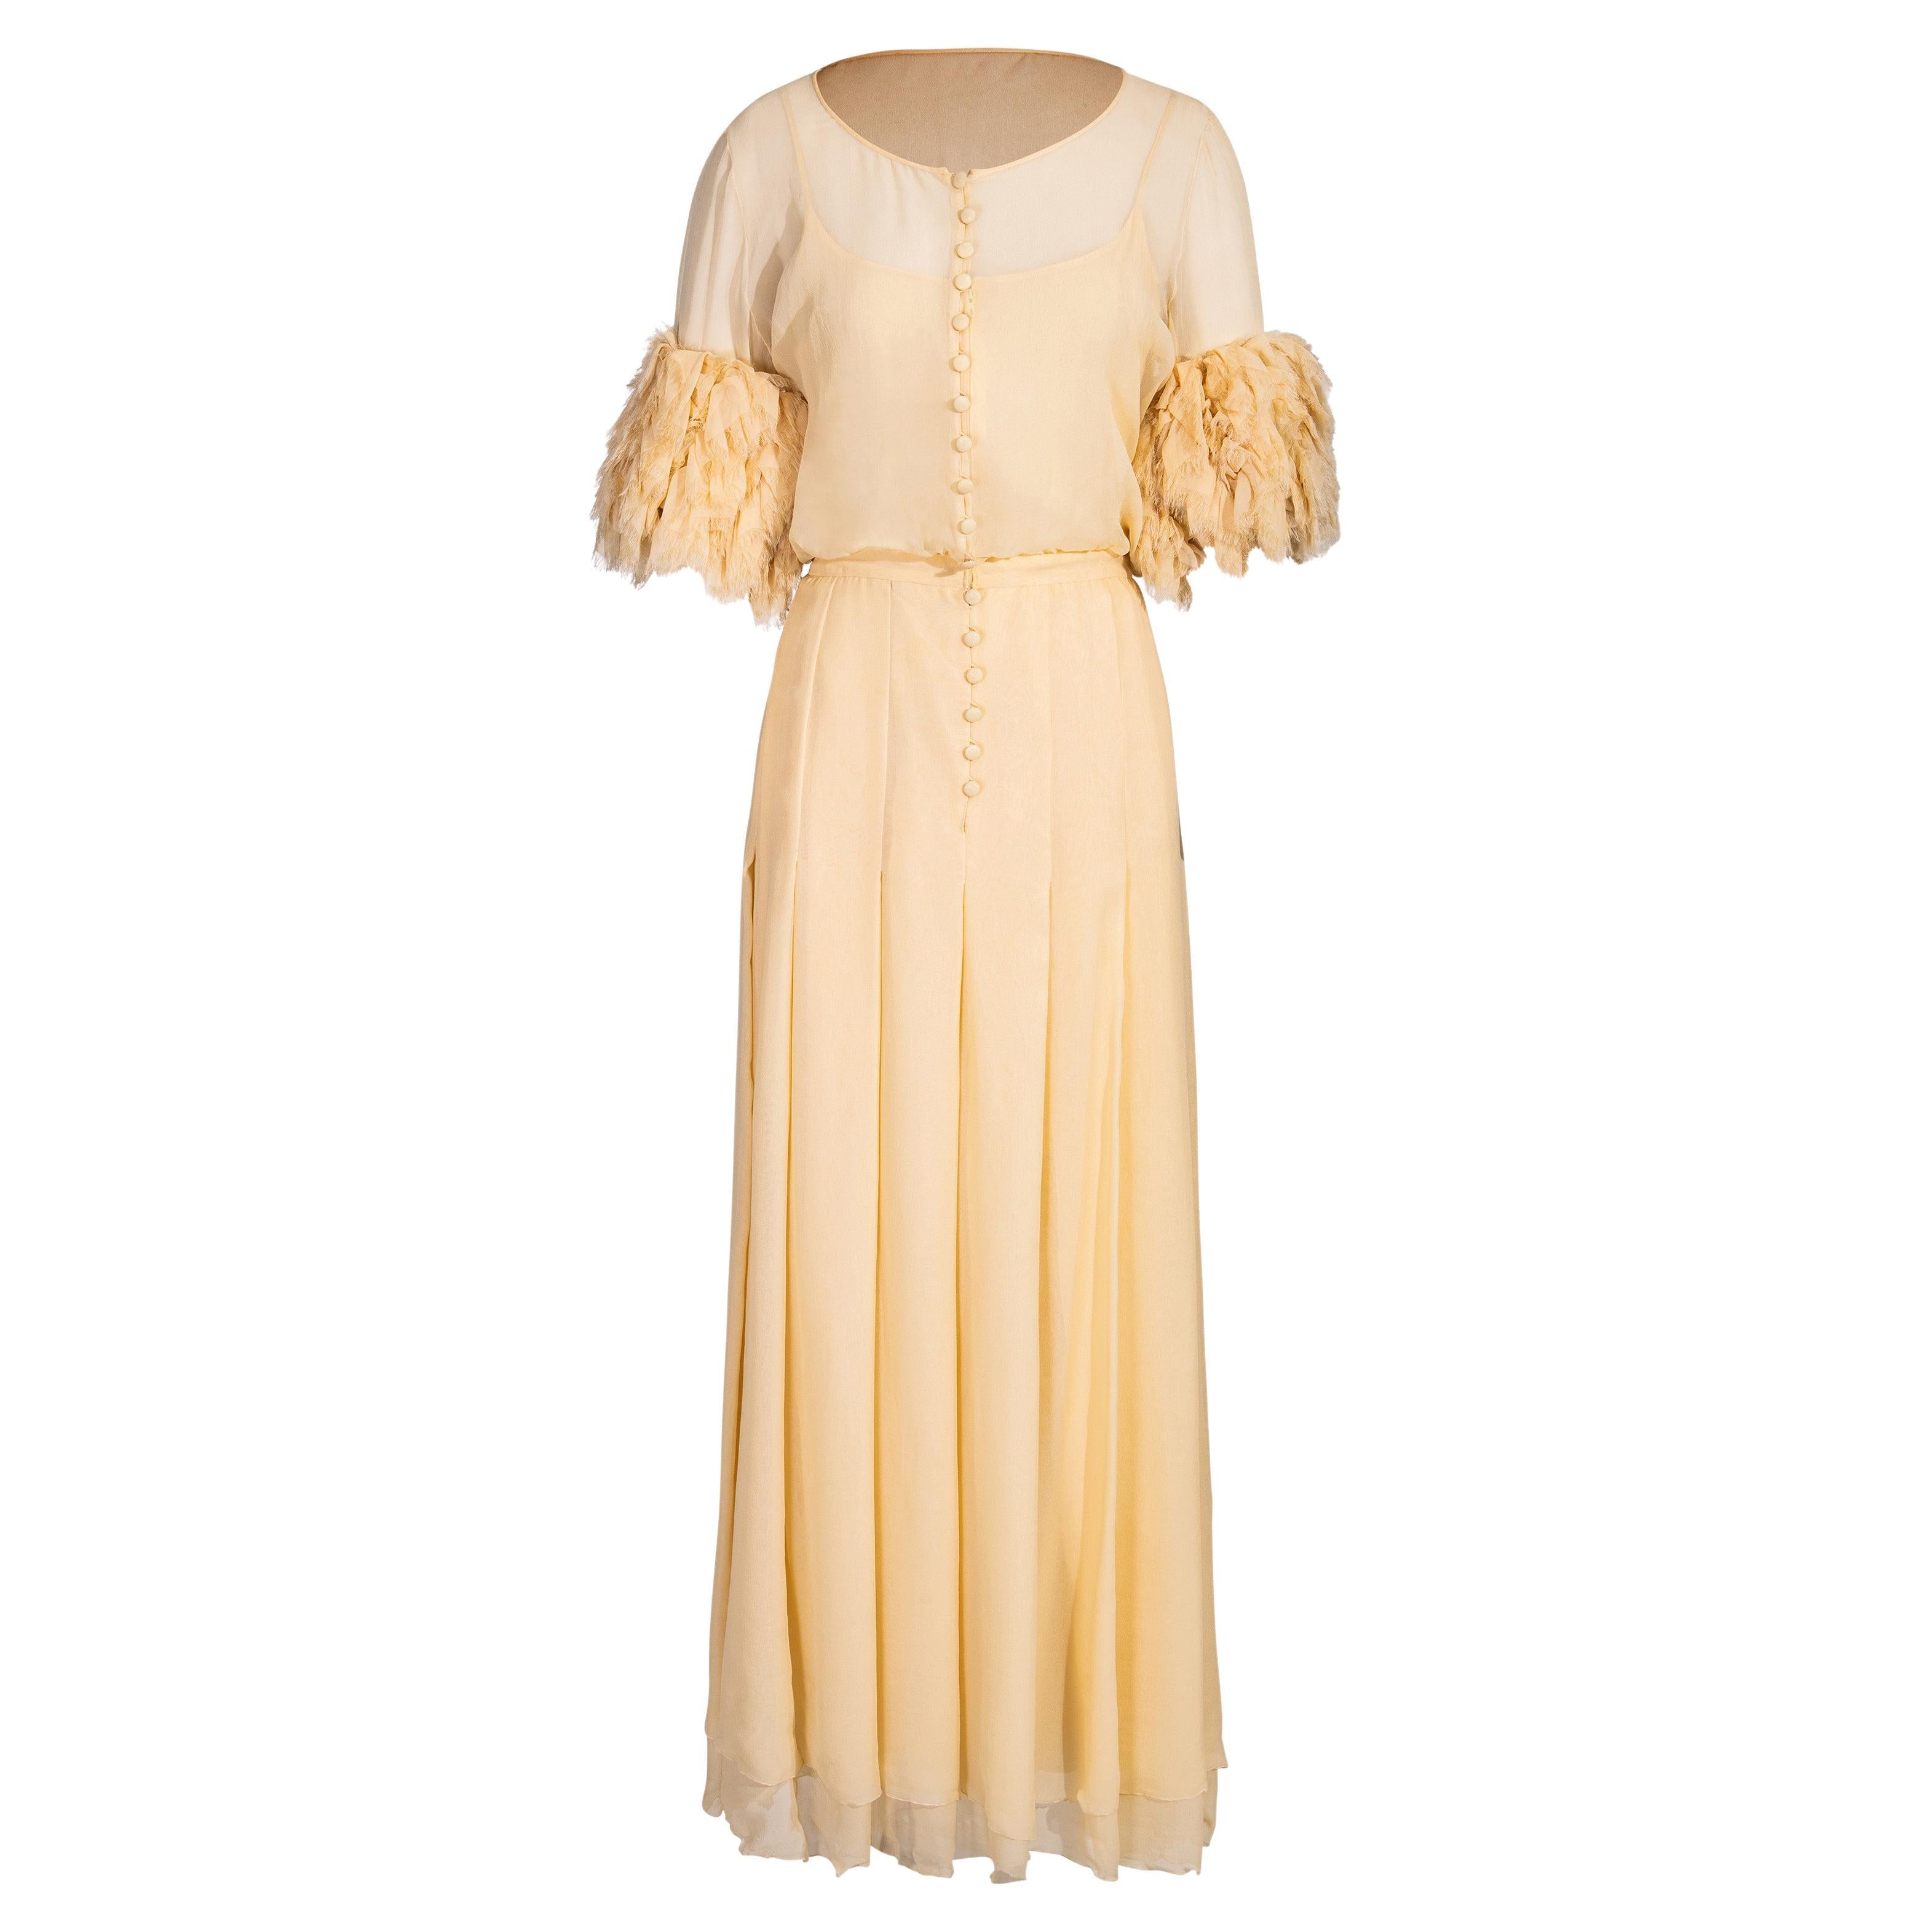 S/S 1984 Chanel by Karl Lagerfeld Butter Yellow Silk Chiffon Gown